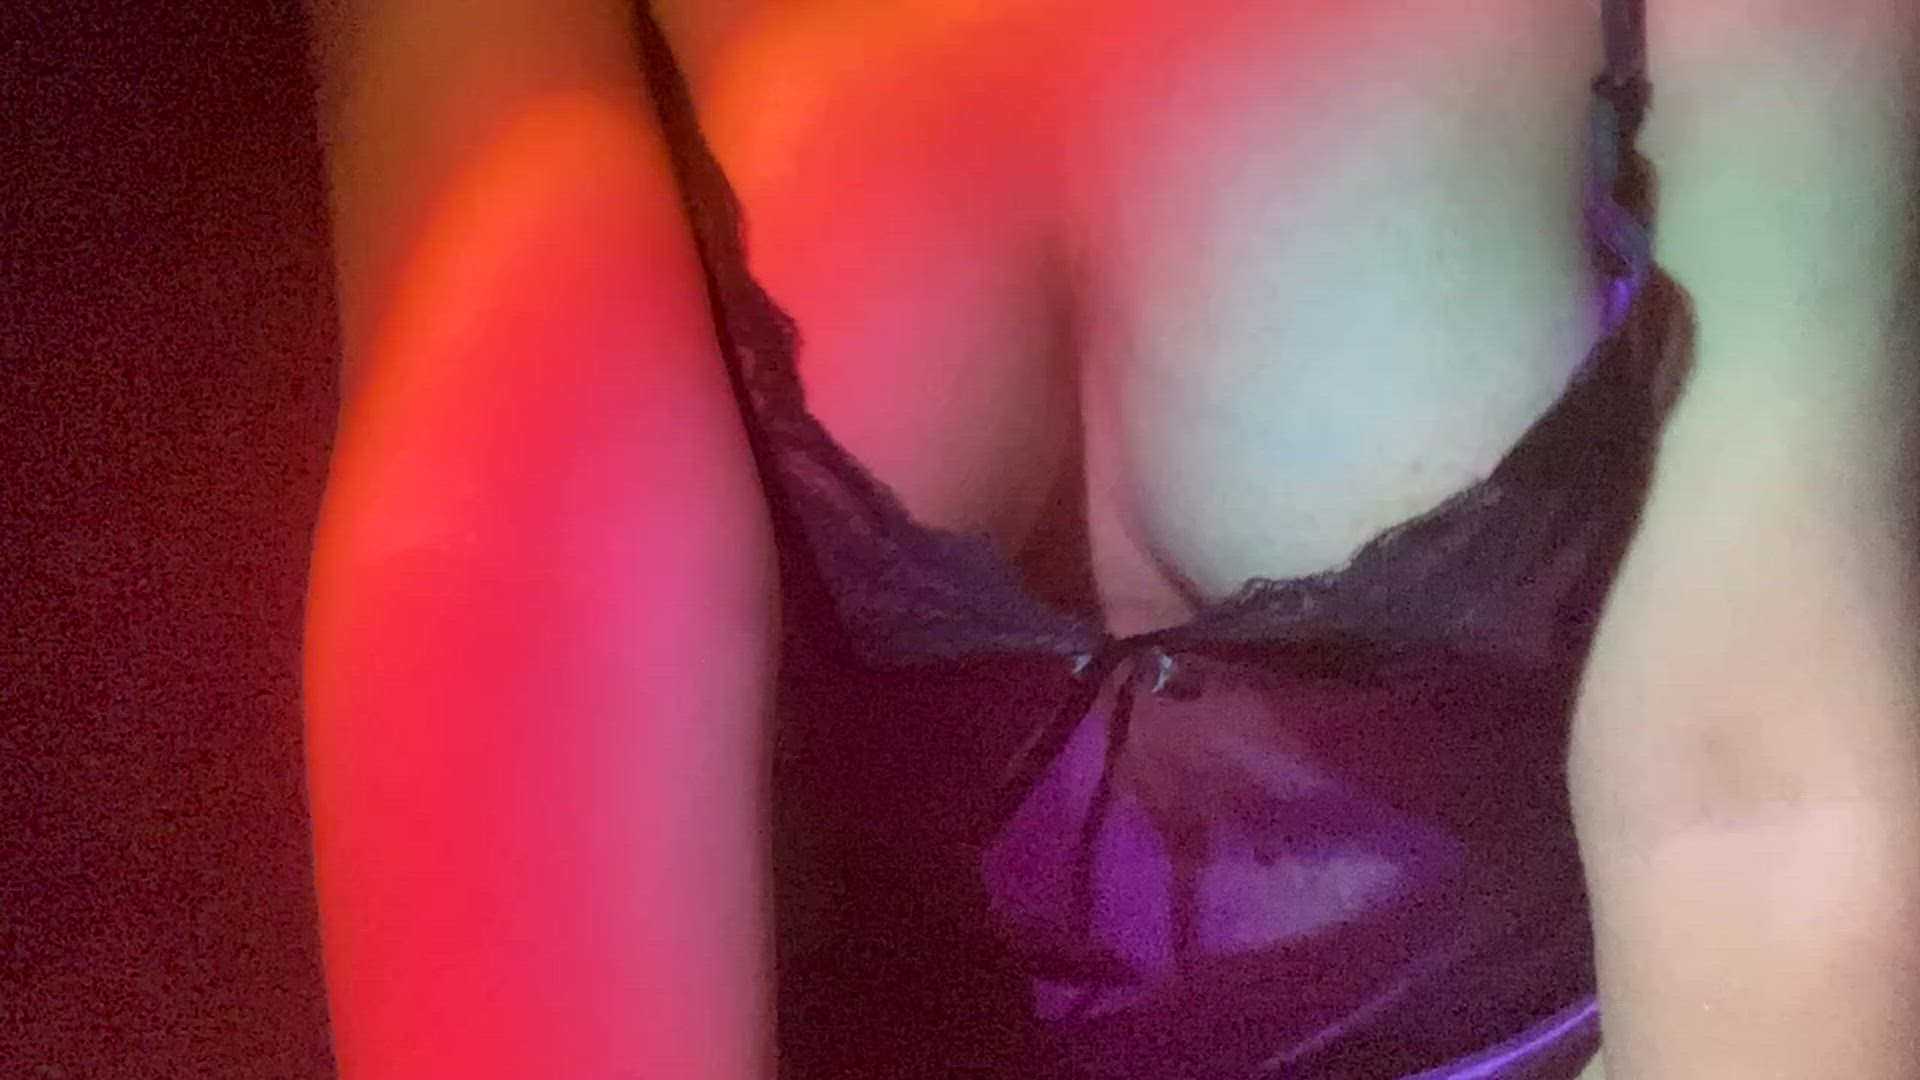 Boobs porn video with onlyfans model xhoneyxhazelx <strong>@xhoneyxhazelx</strong>